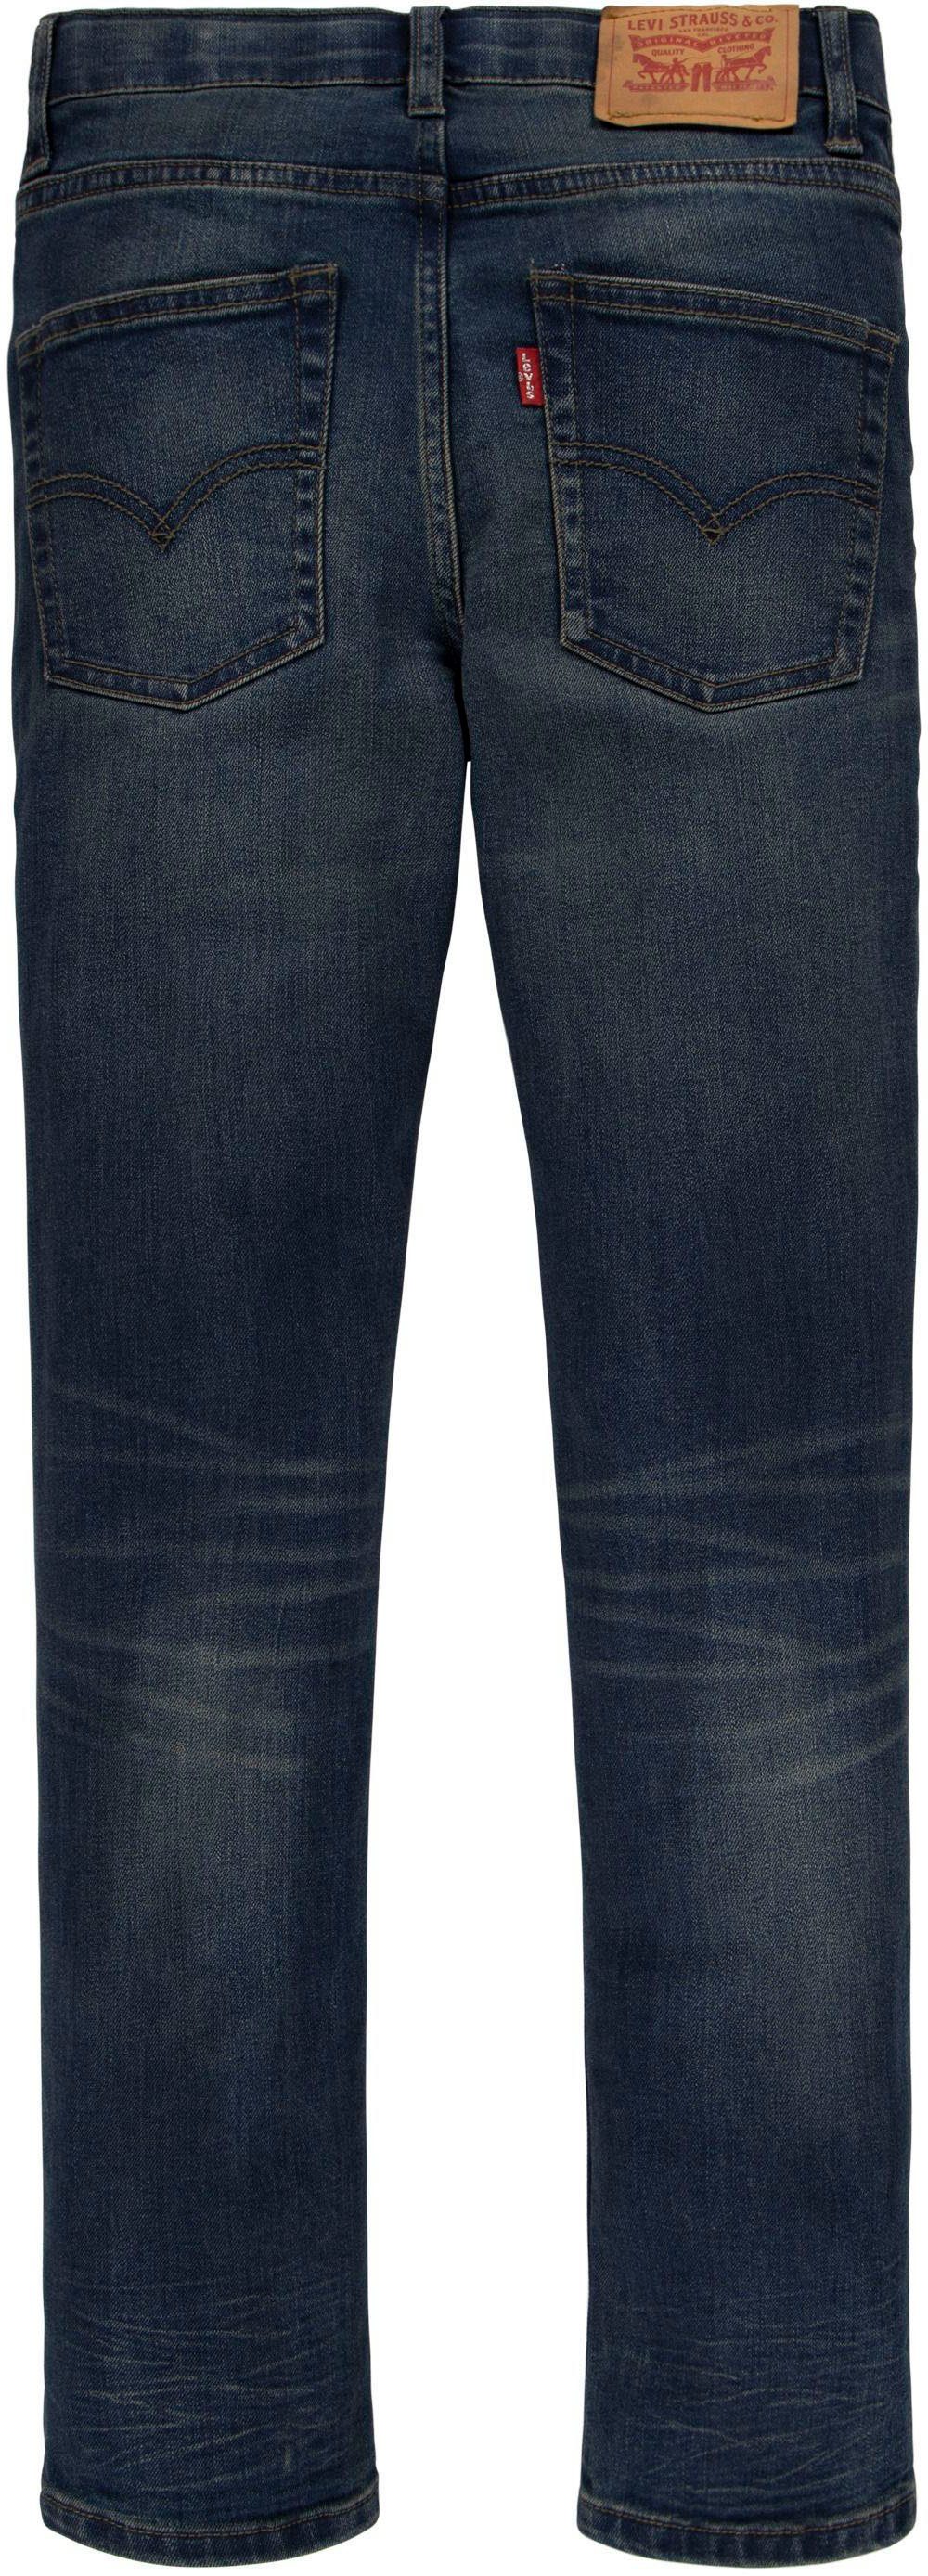 tape FIT BOYS Skinny-fit-Jeans Levi's® 510 mixed SKINNY Kids JEANS for